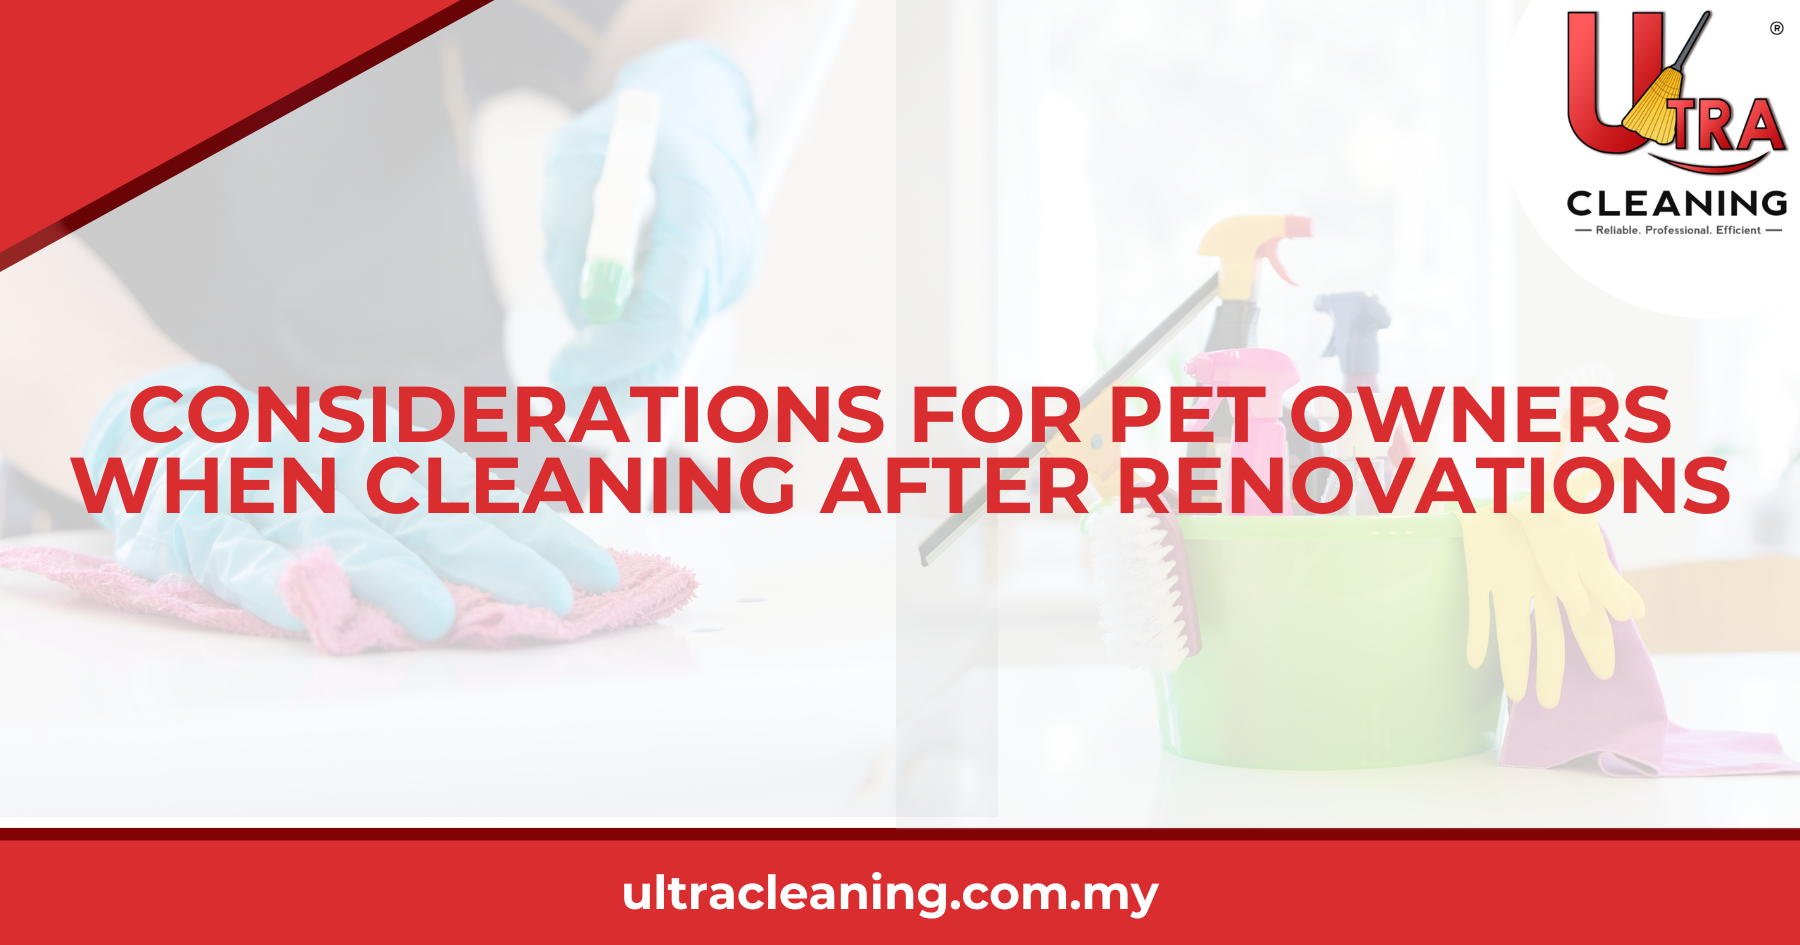 Considerations for Pet Owners When Cleaning After Renovations